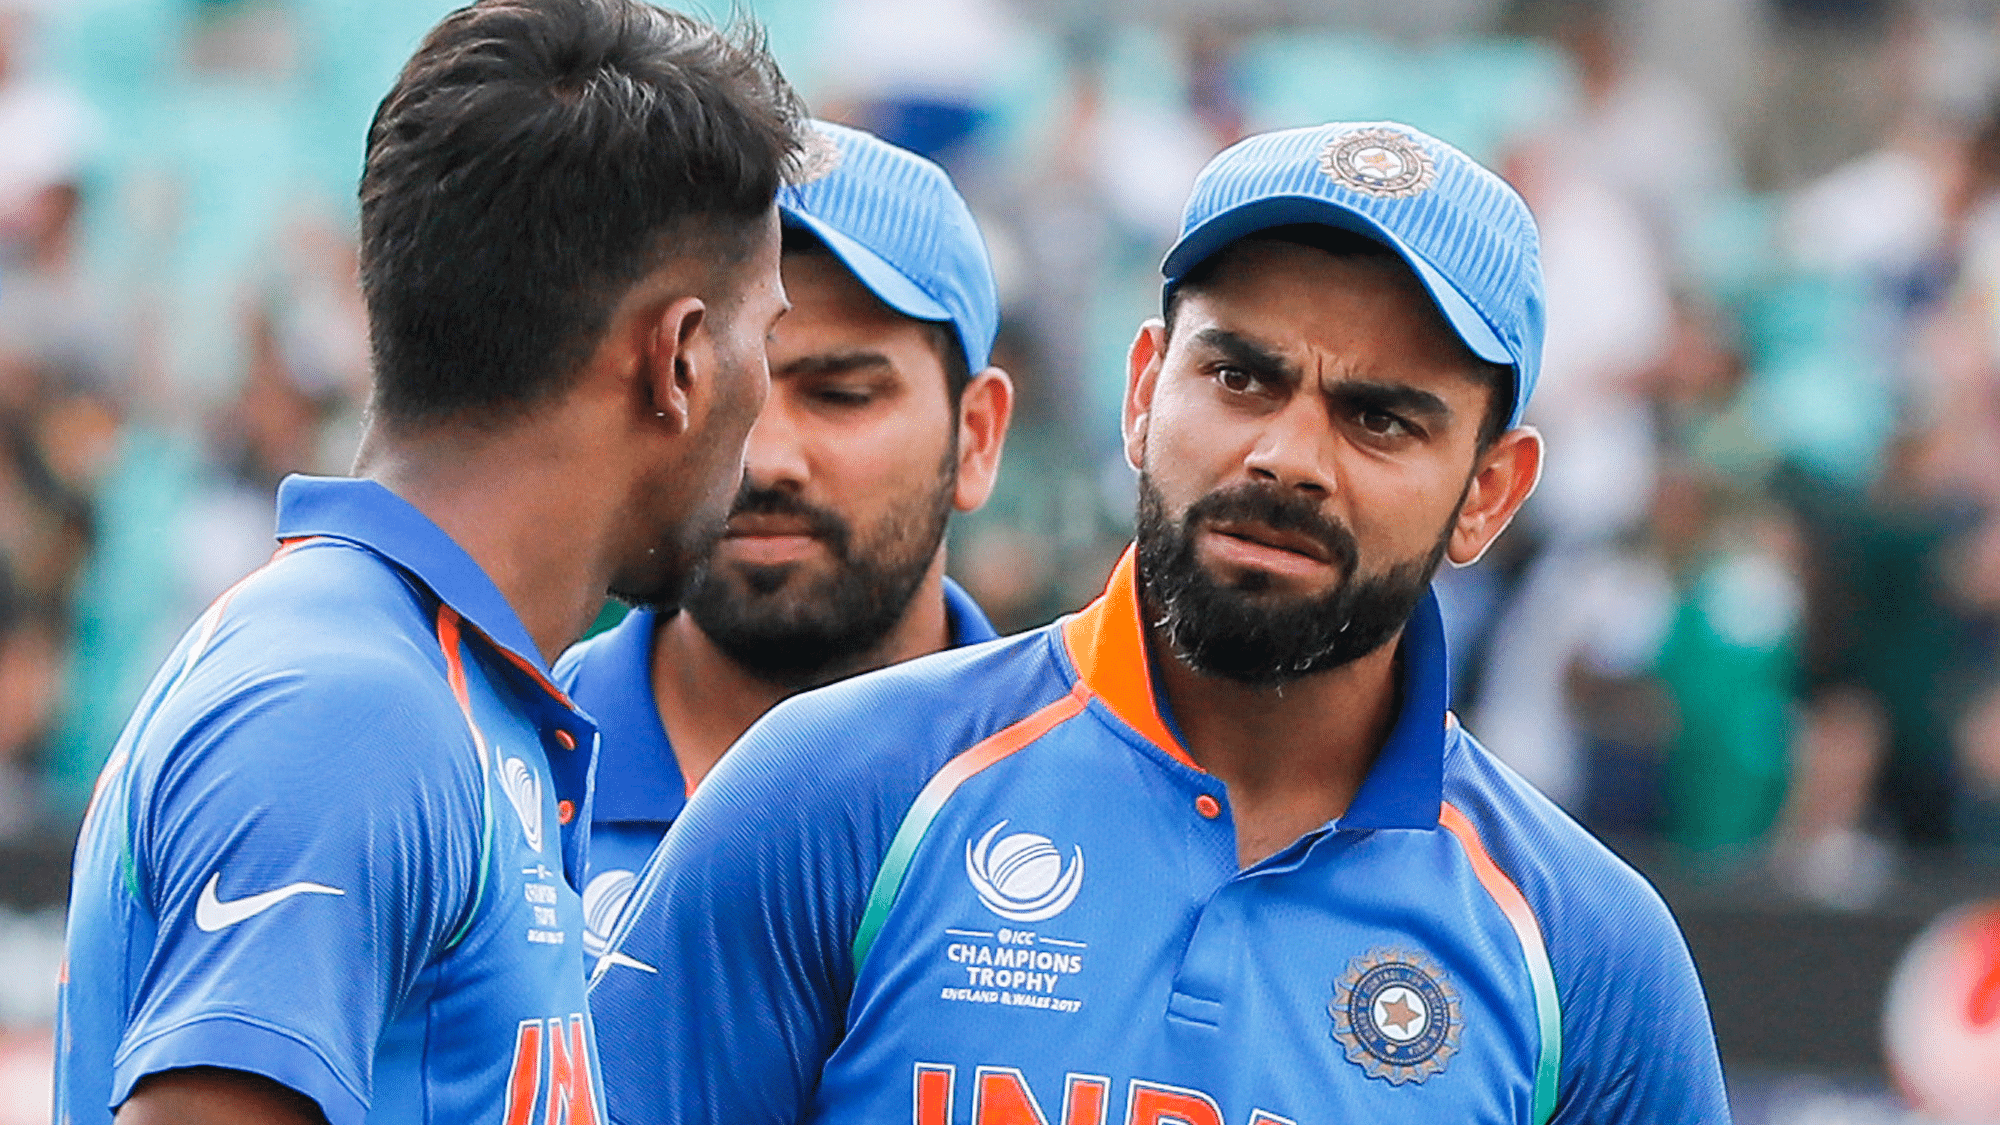  Virat Kohli &amp; team failed to put up a good chase for Pakistan’s total of 338 in the Champions Trophy final. (Photo: AP)